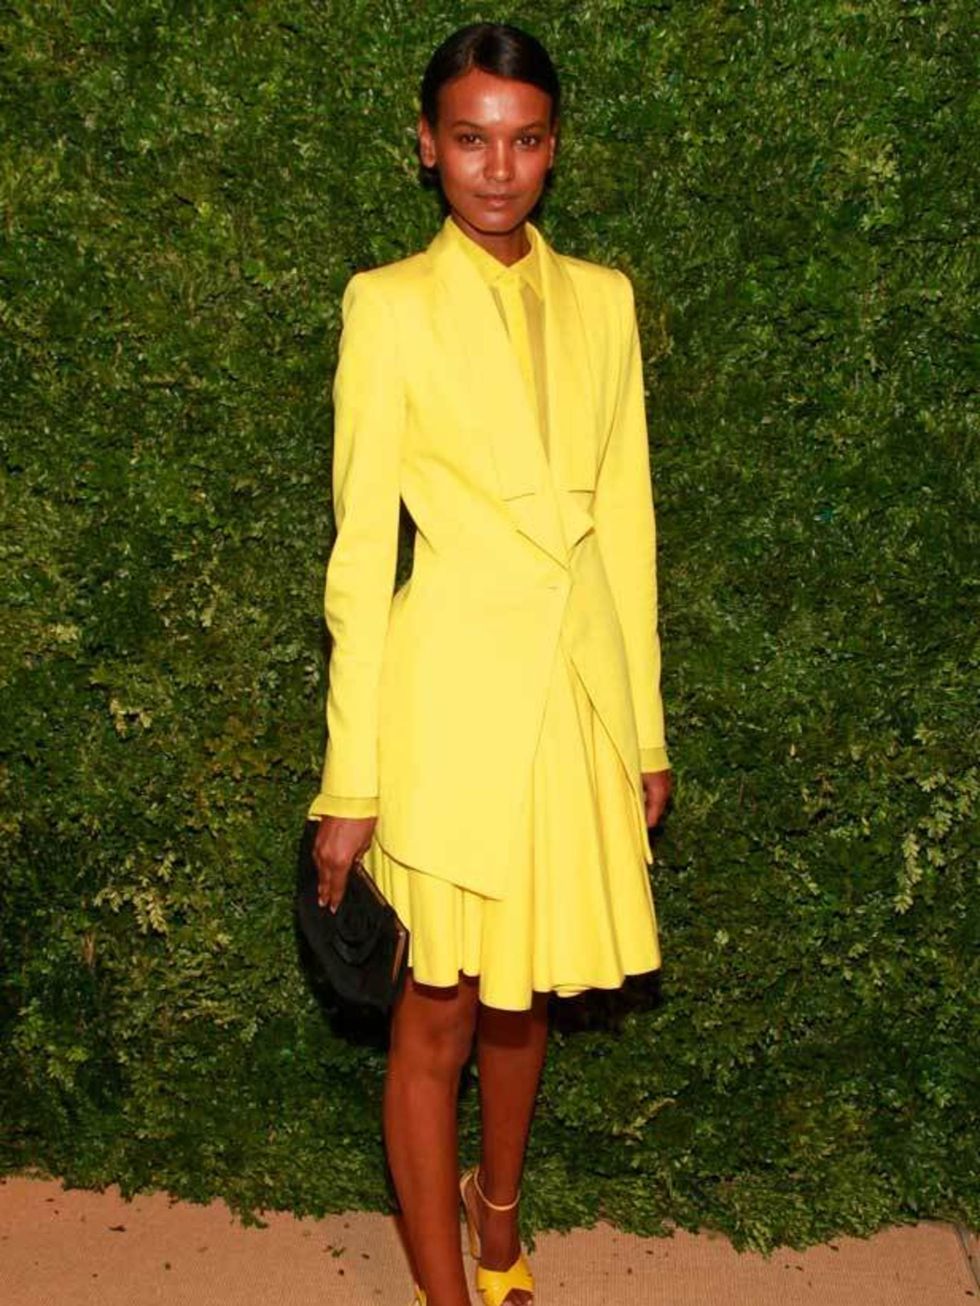 <p>Liya Kebede wore a bright yellow suit by<a href="http://www.elleuk.com/catwalk/collections/cushnie-et-ochs/"> Cushnie et Ochs</a> to the <a href="http://www.elleuk.com/starstyle/special-features/(section)/cfda-fashion-fund-awards-2011">2011 CFDA Fashio